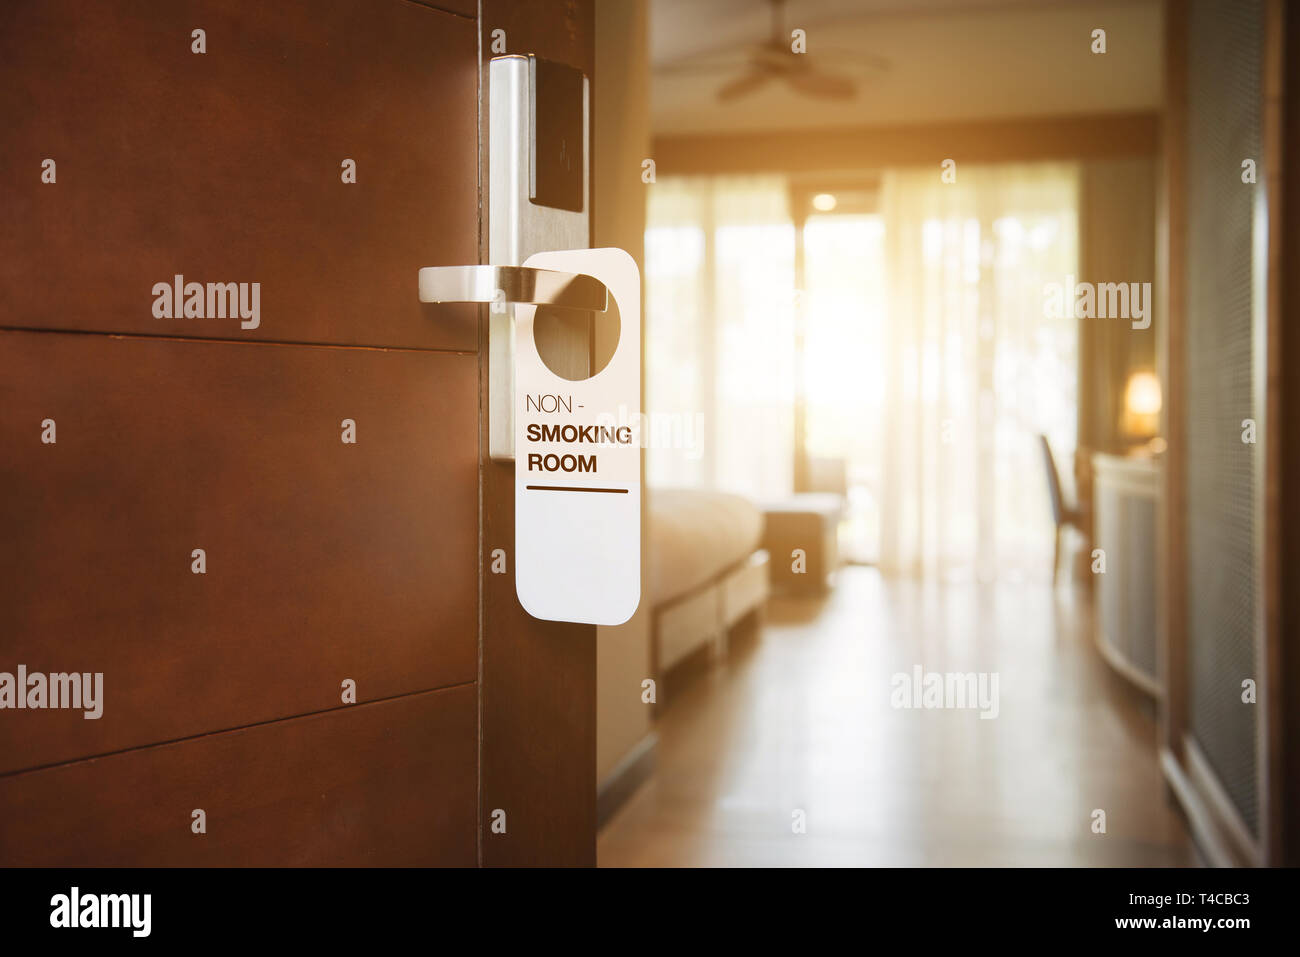 No smoking sign on a hotel room electronic door lock Stock Photo